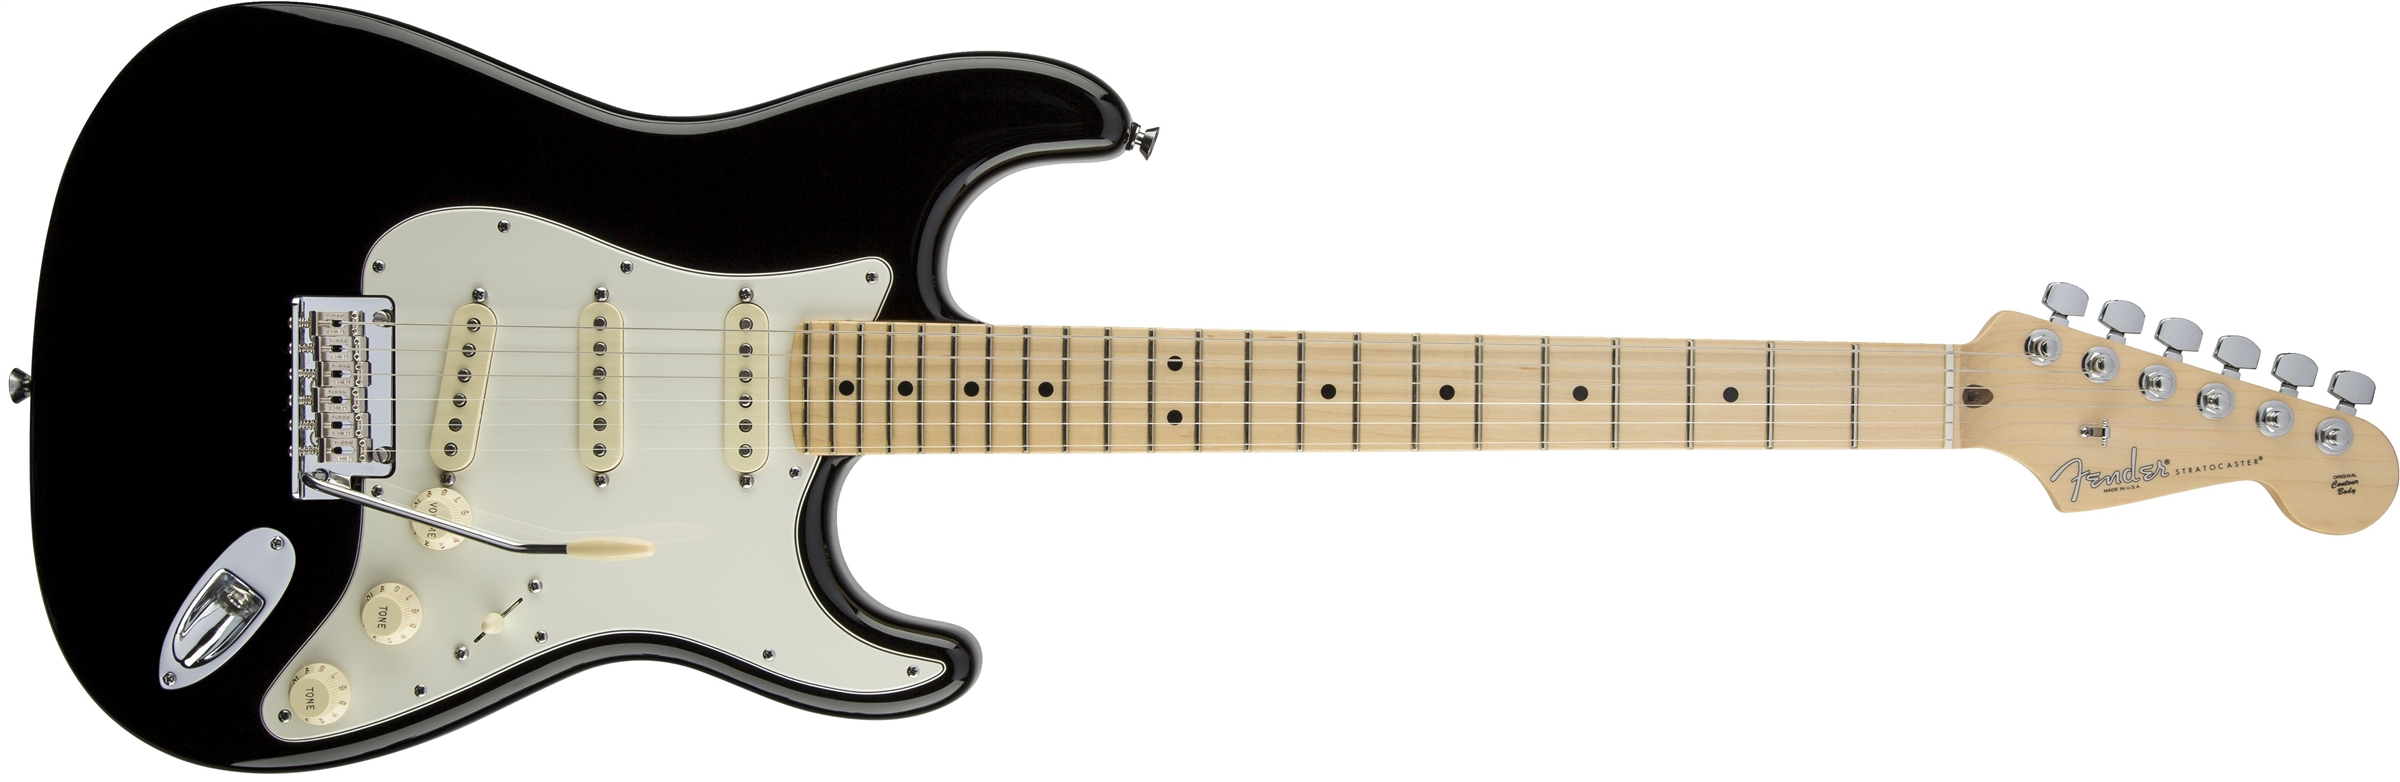 stratocaster famous guitar body designs